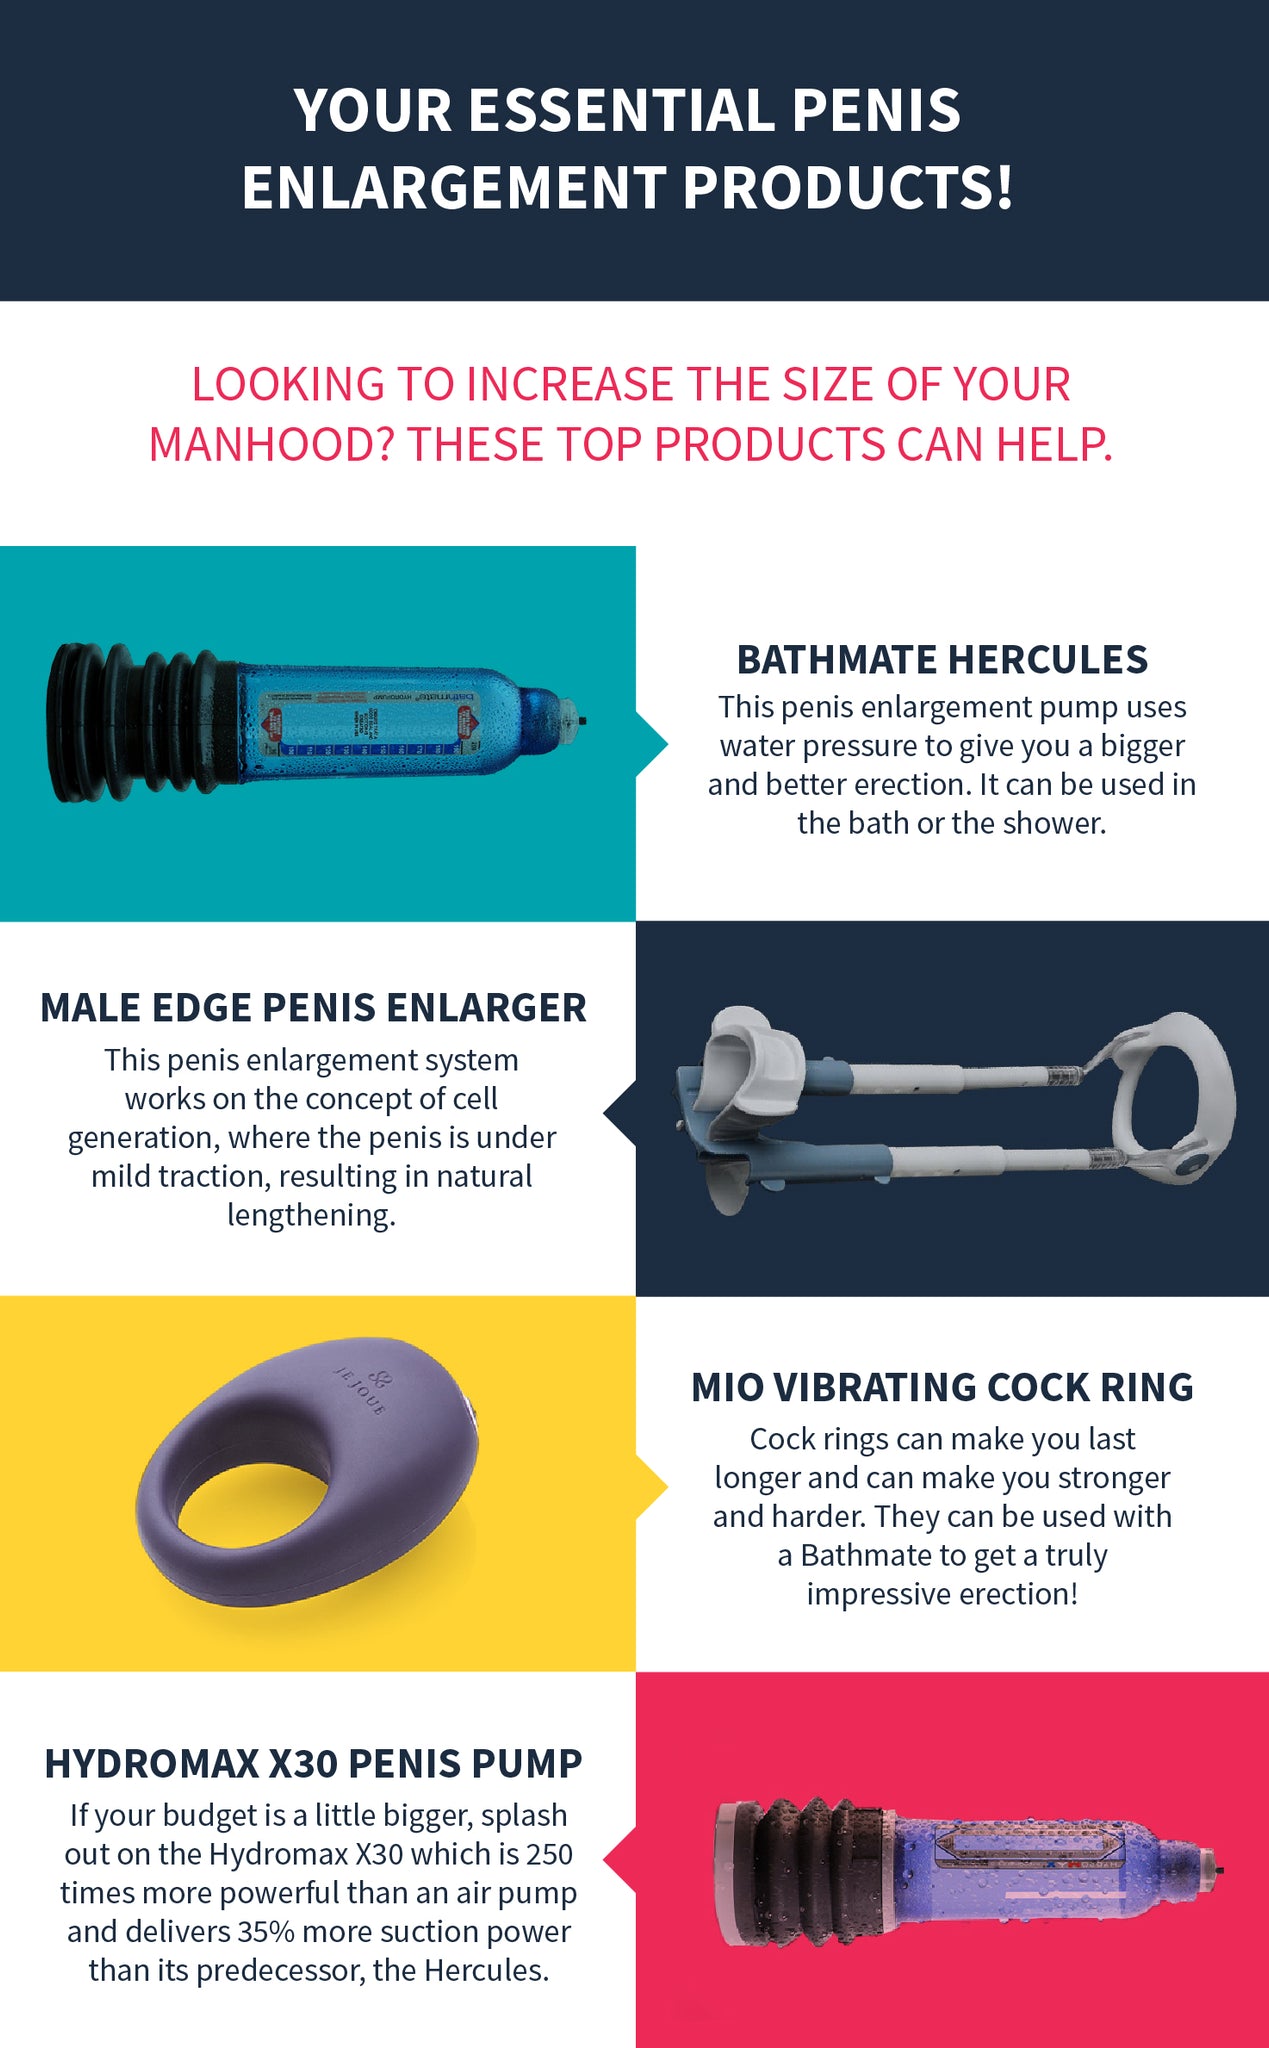 Your Essential Penis Enlargement Products!